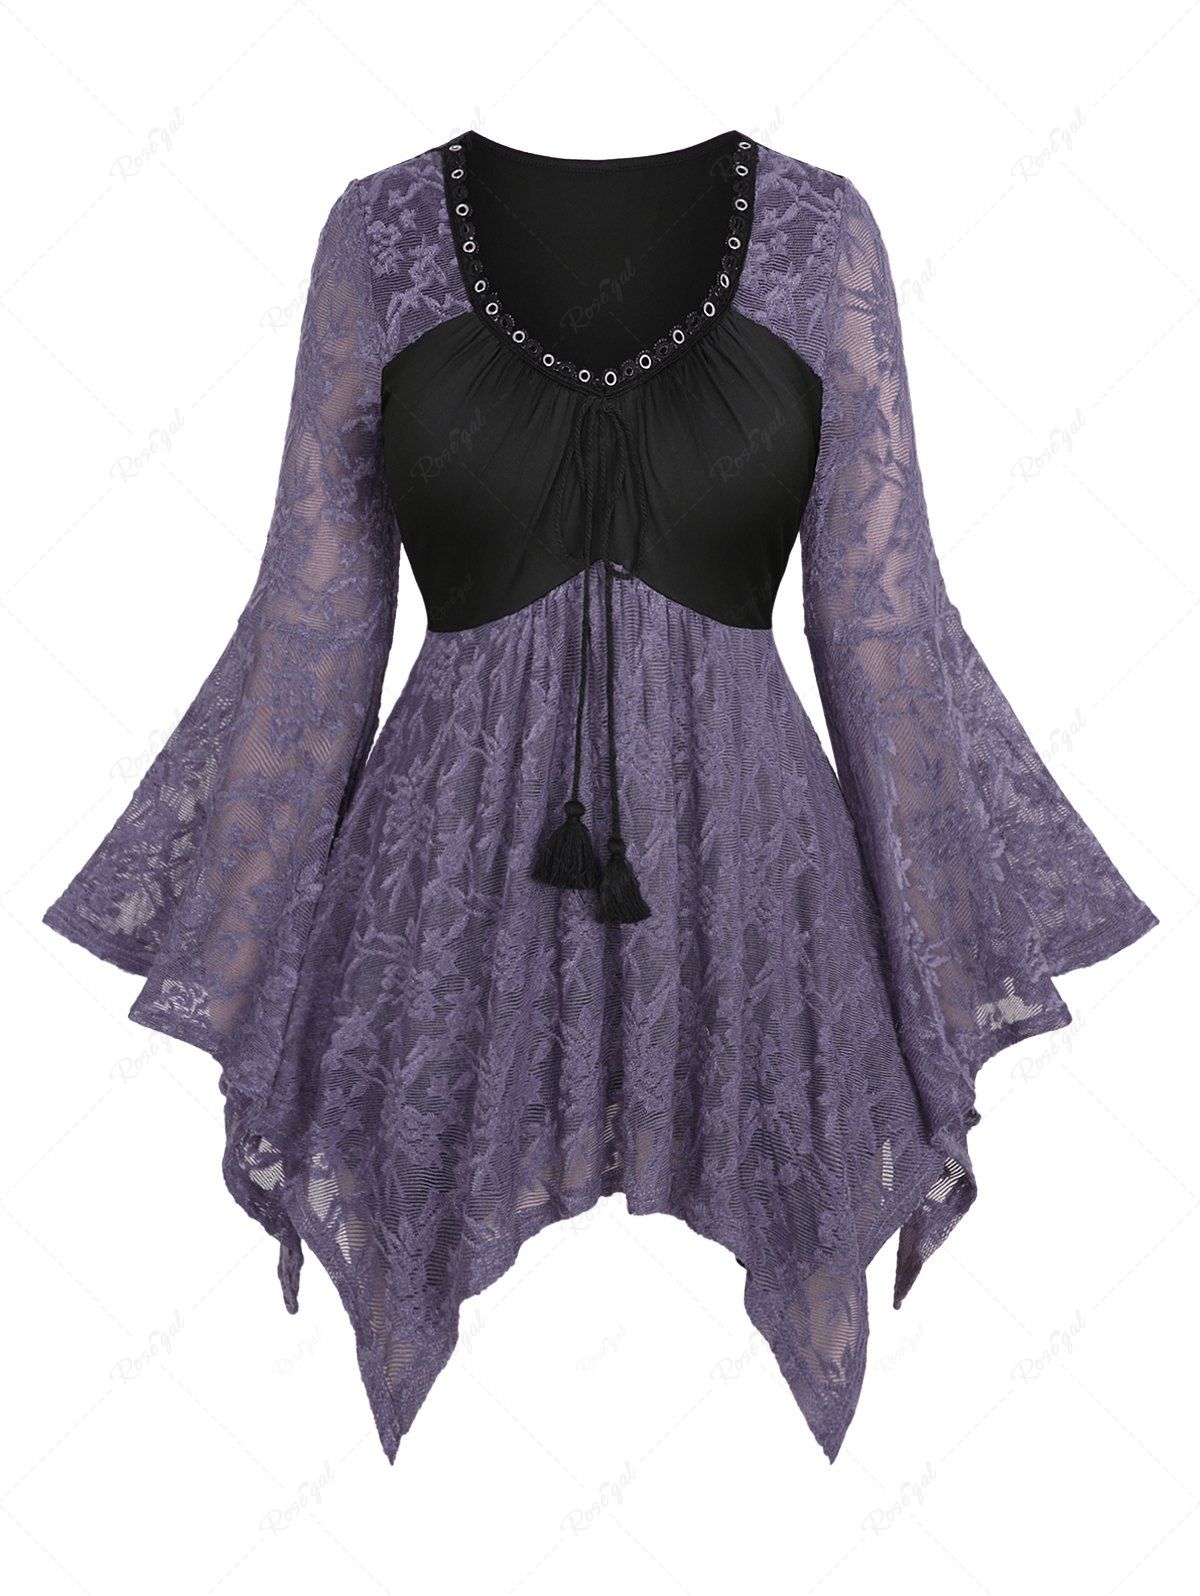 Outfit Plus Size Flare Sleeves Uneven Floral Lace Embroidered Ruched Tied Tassel Patchwork Grommet Handkerchief Top  